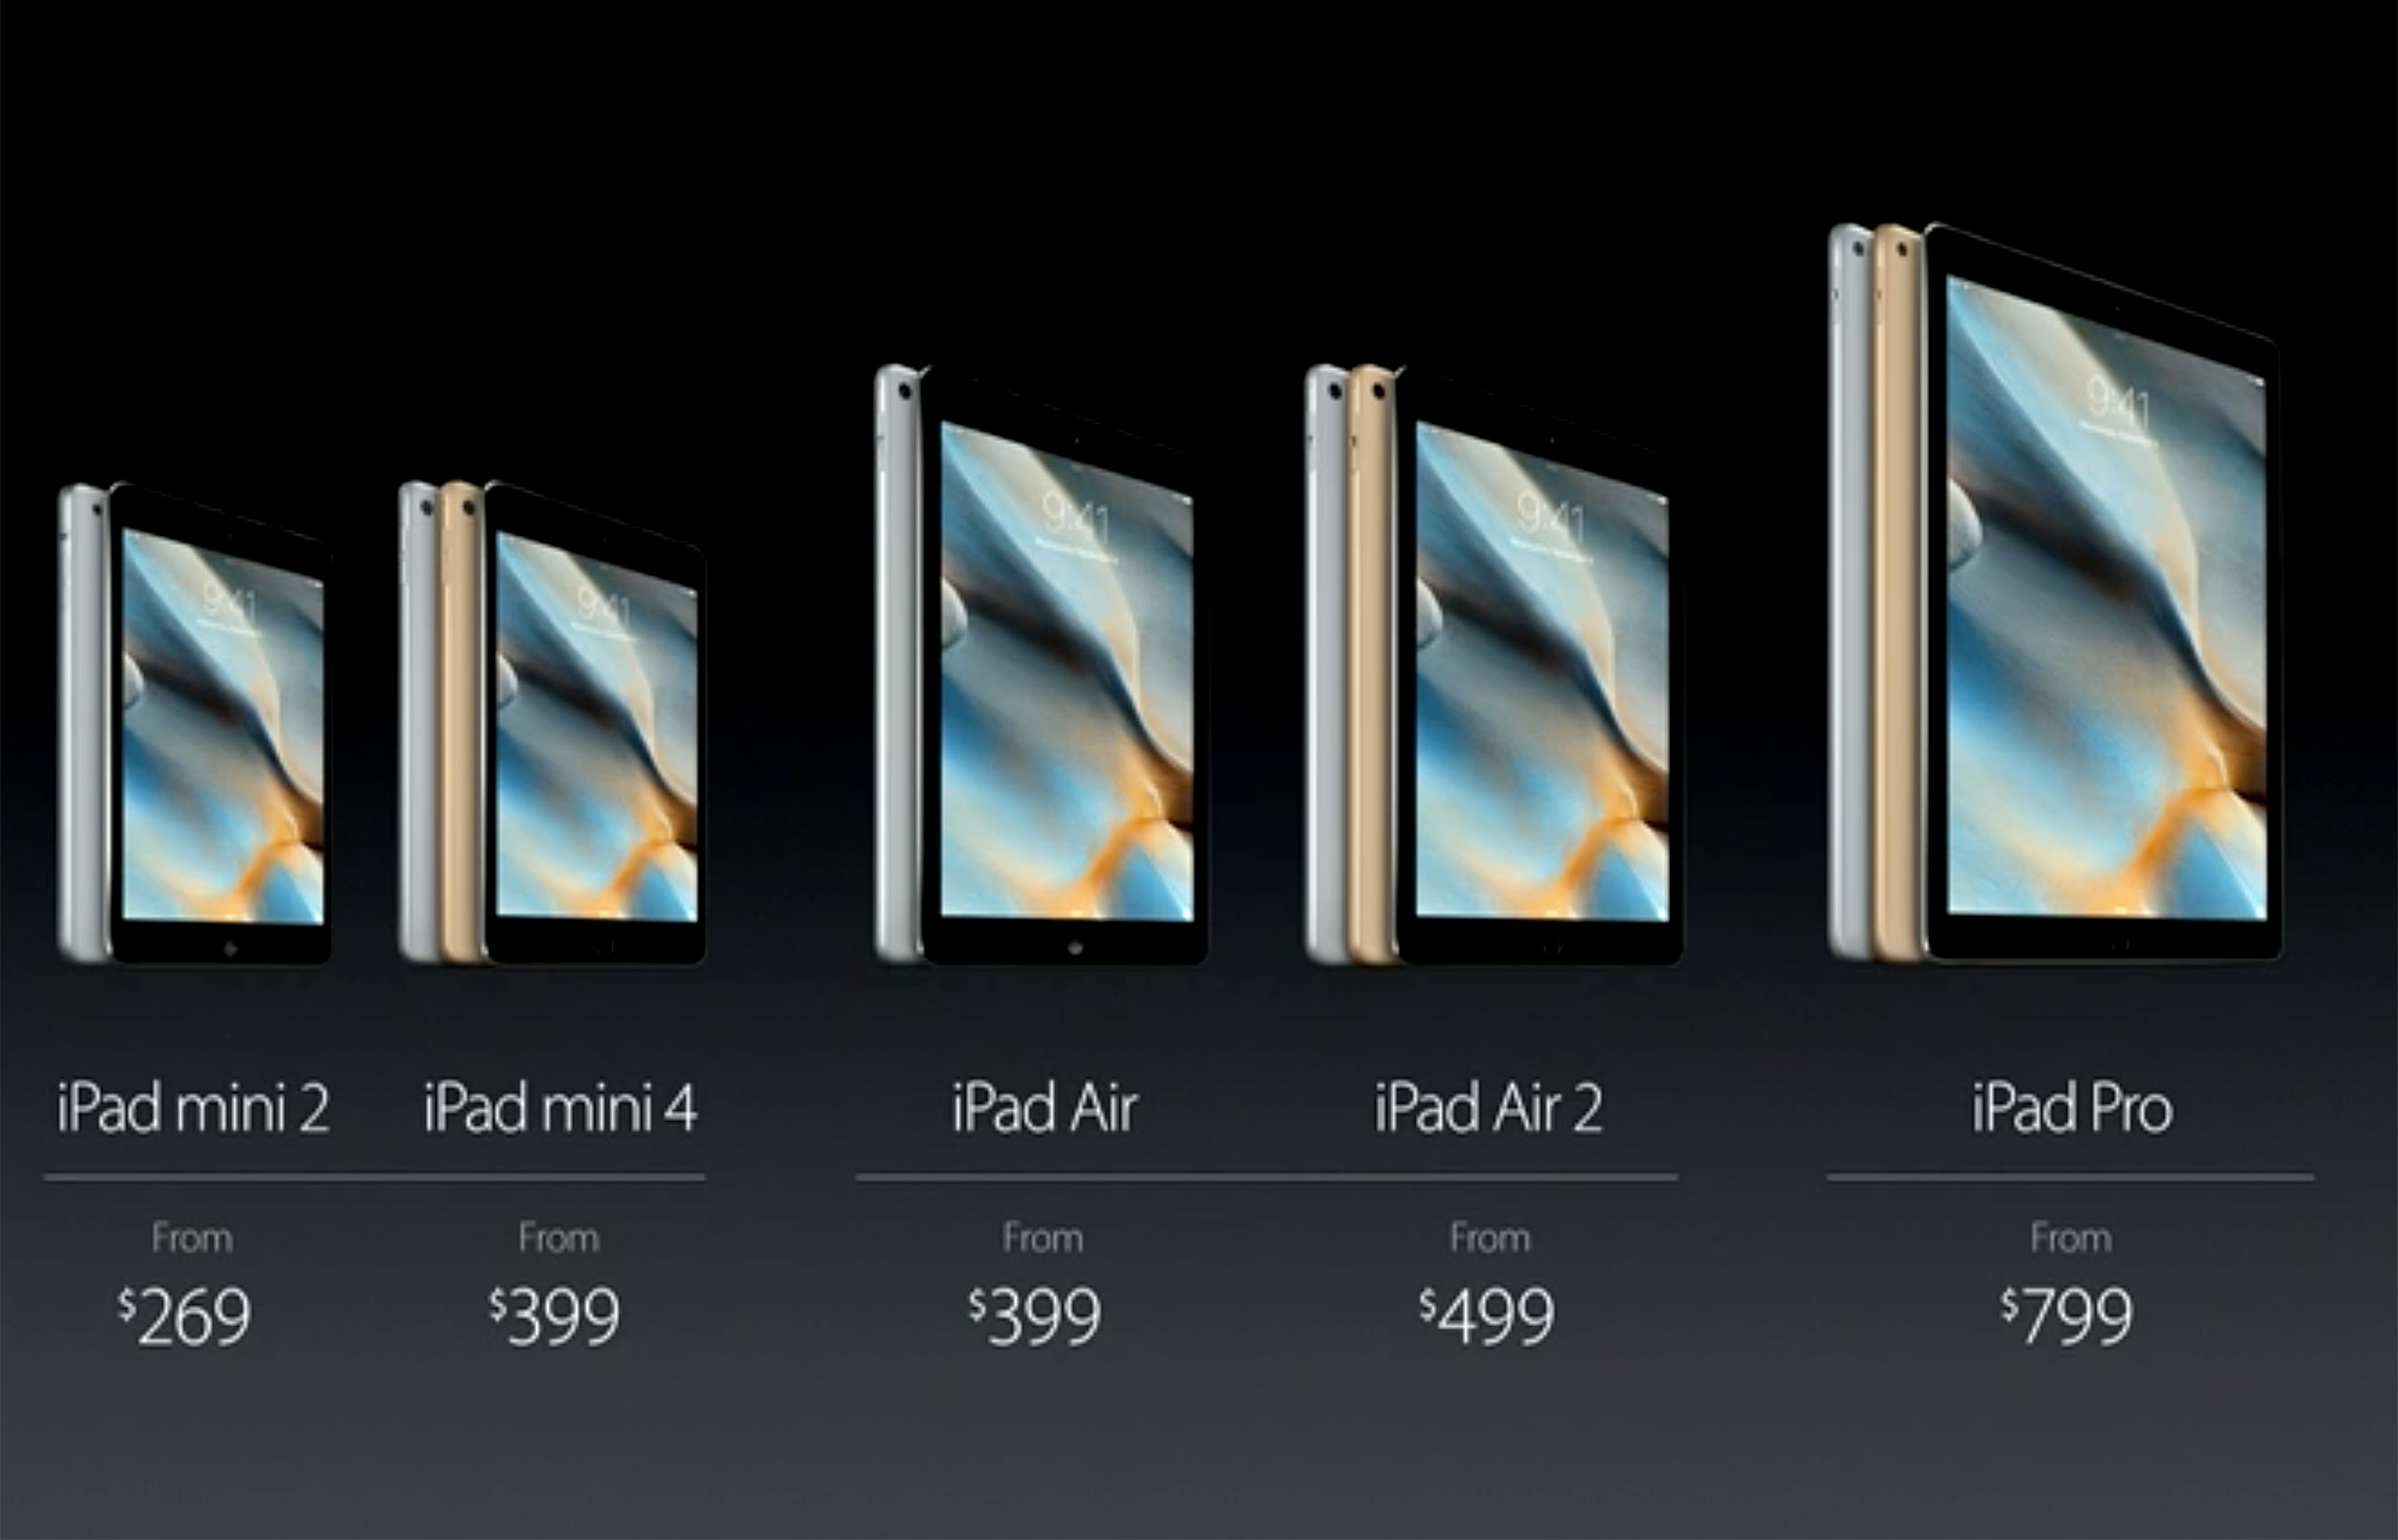 iPad Pro is a First Generation Device